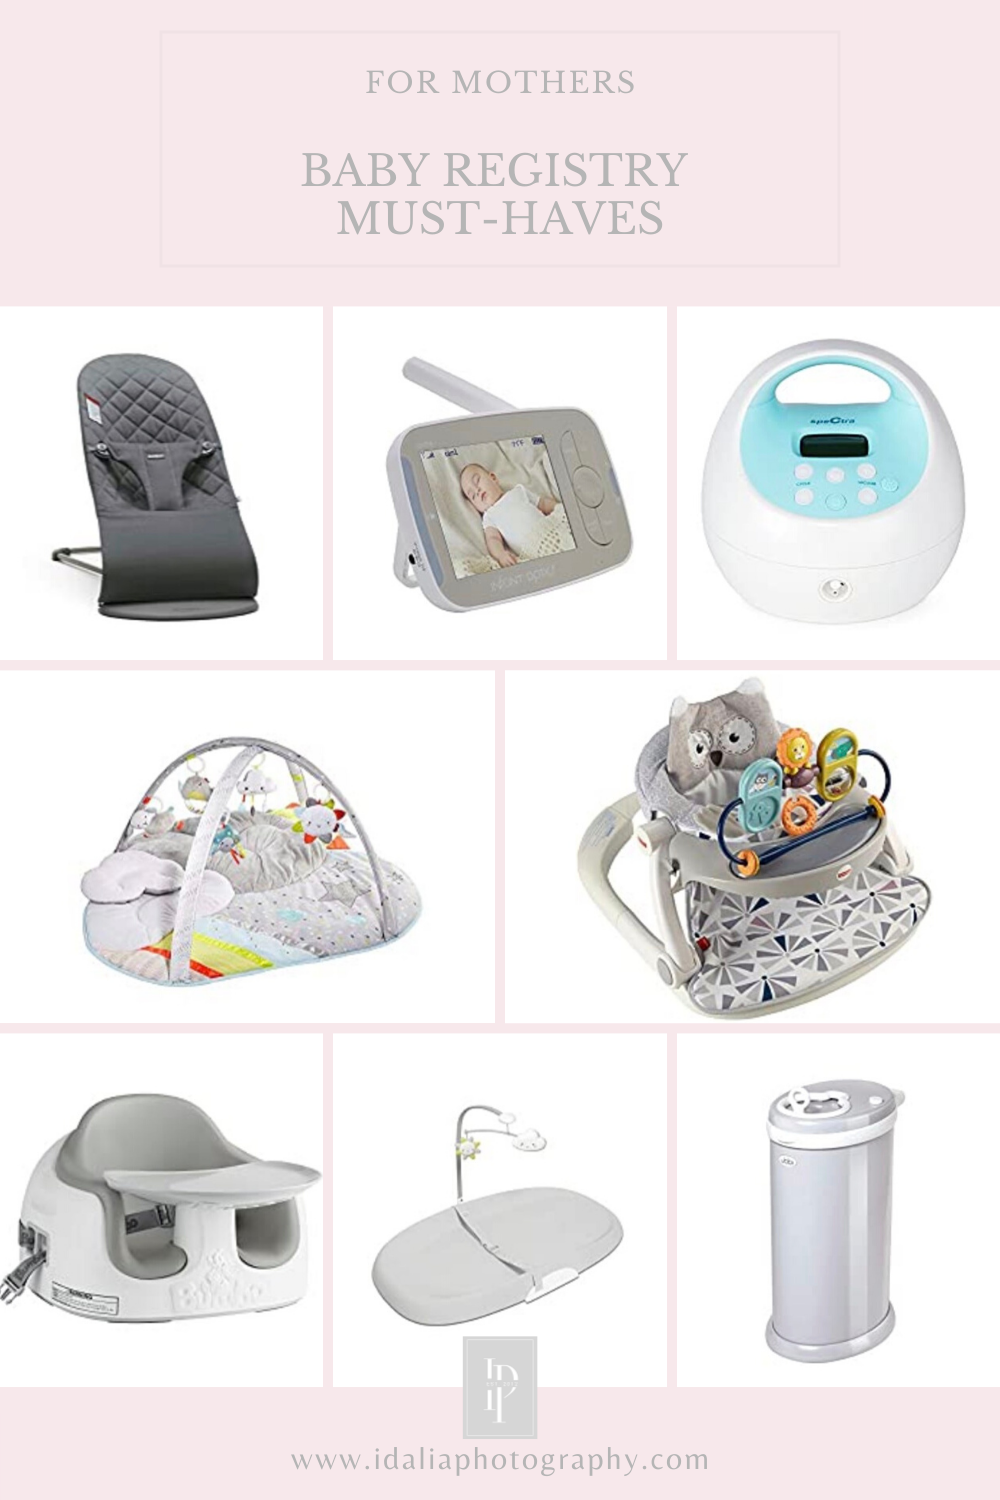 Baby Registry Must-Haves by Idalia Photography